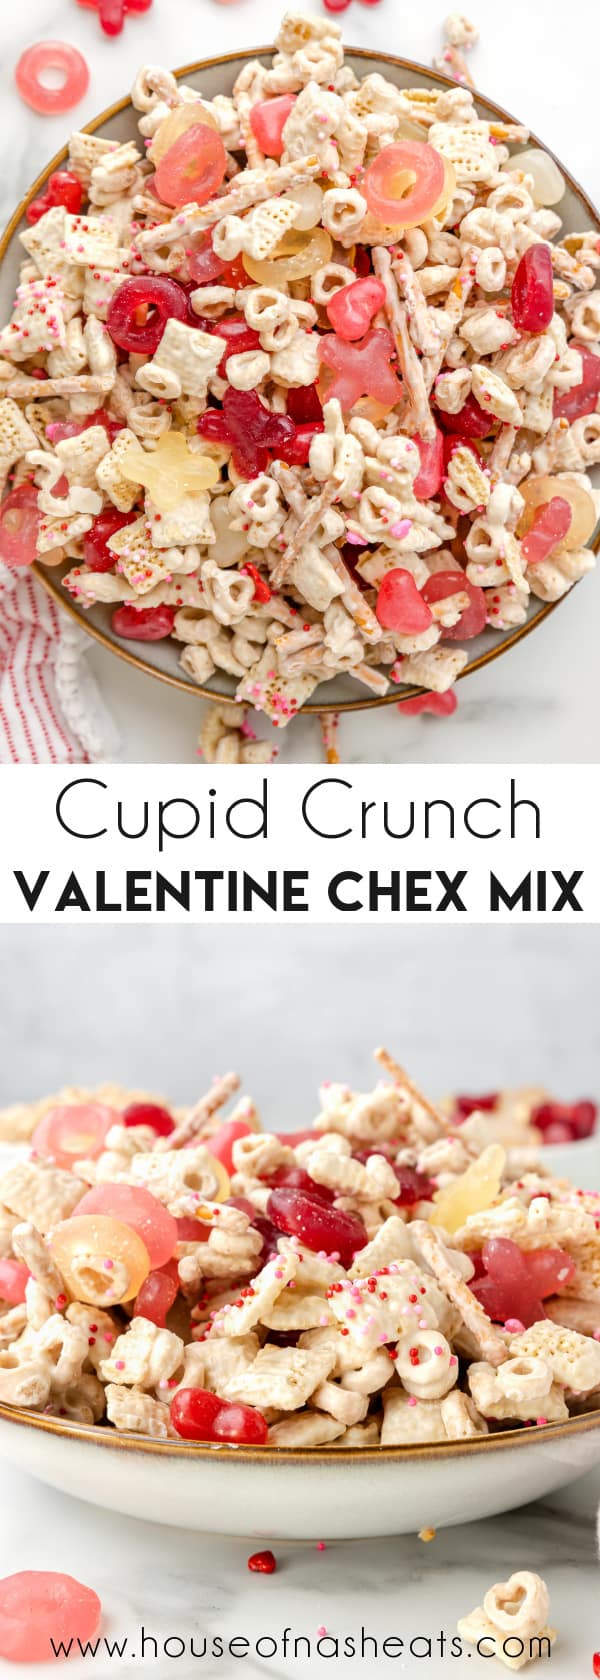 A collage of images of Valentine chex mix with text overlay.